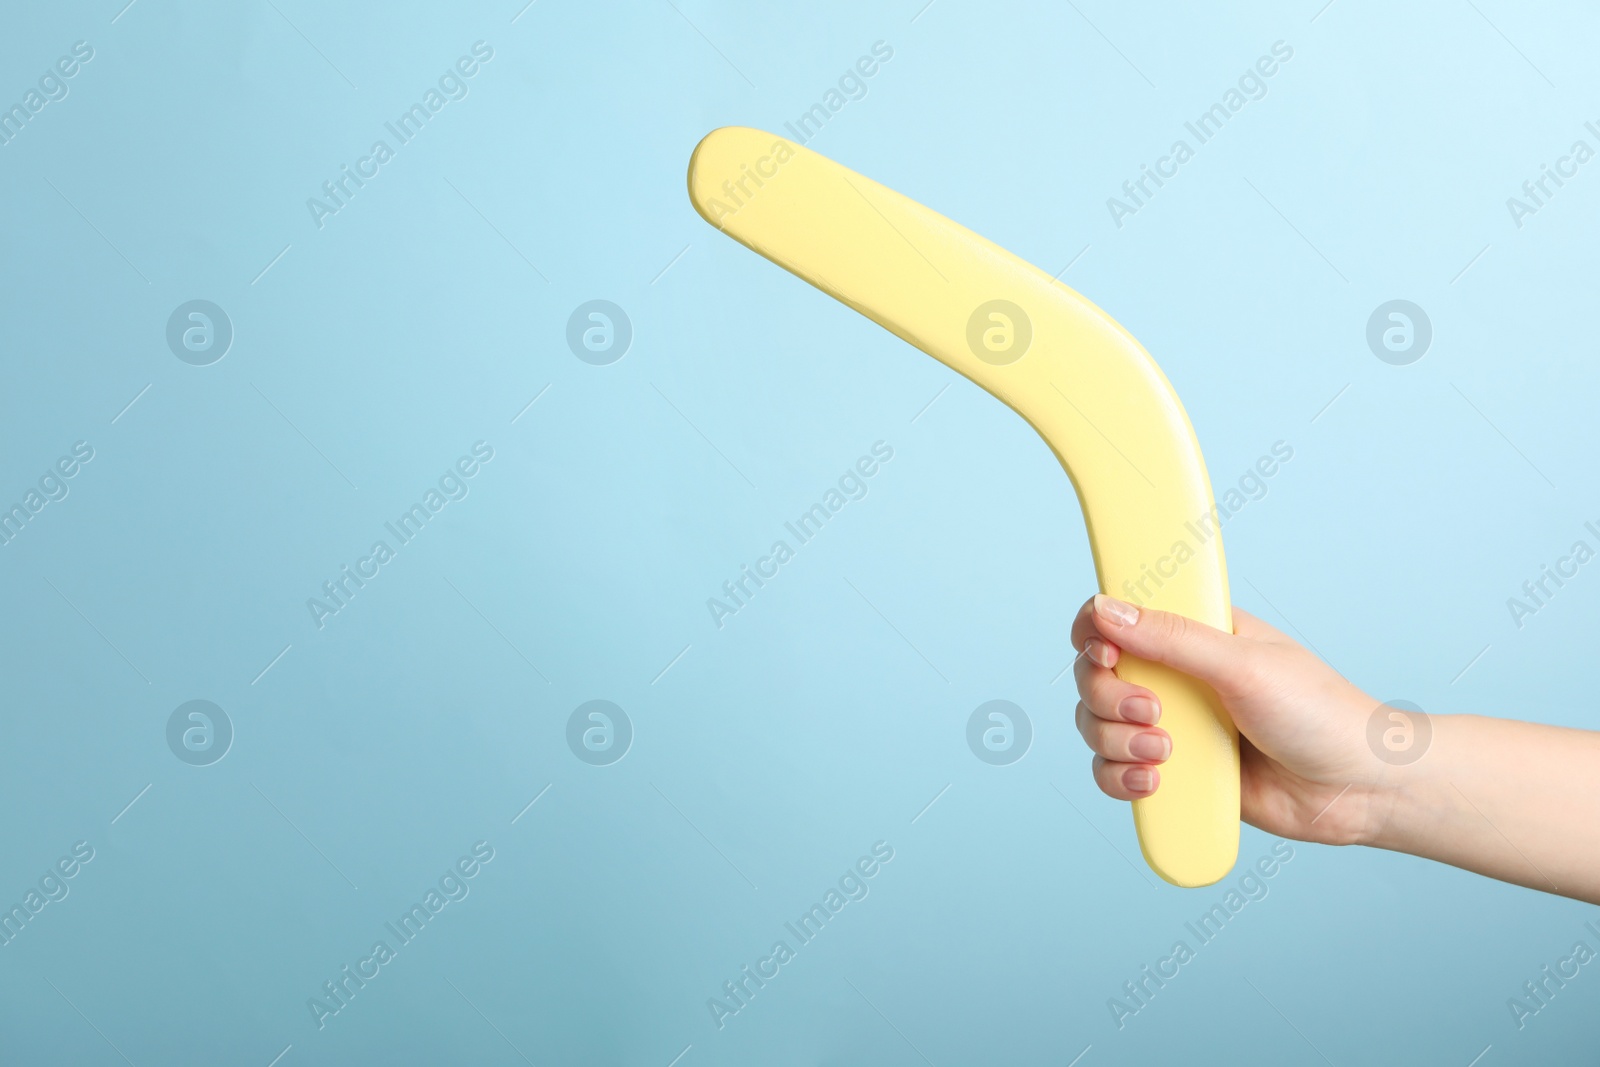 Photo of Woman holding boomerang on light blue background, closeup. Space for text